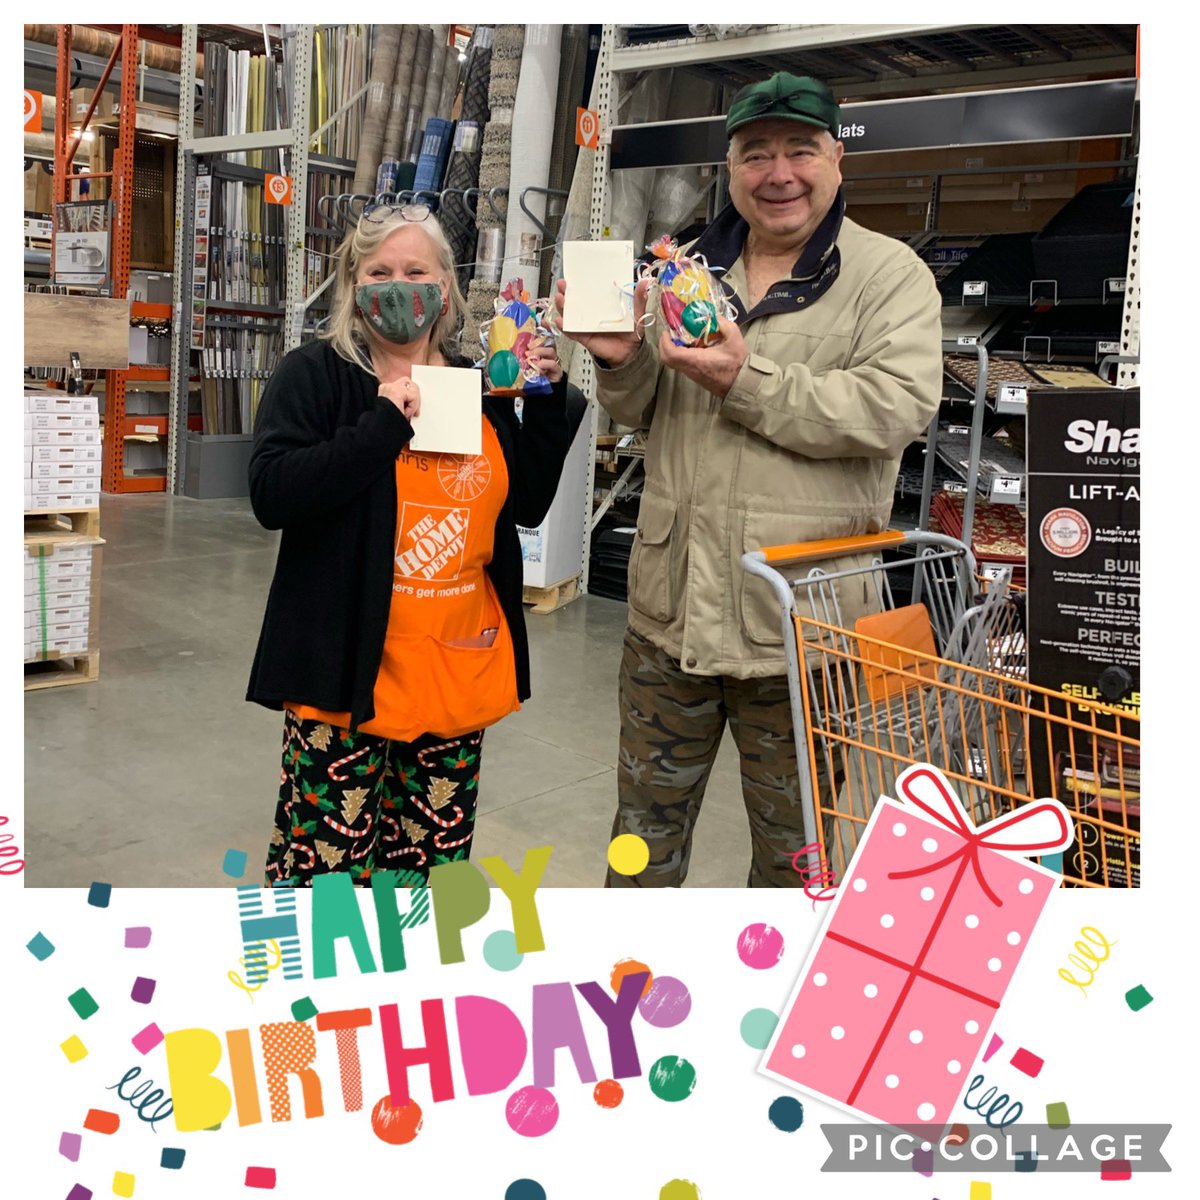 December birthday buddies…Chris and Terry! Happiest of days to you both!!! @HomeDepotCadill @snyder_hd